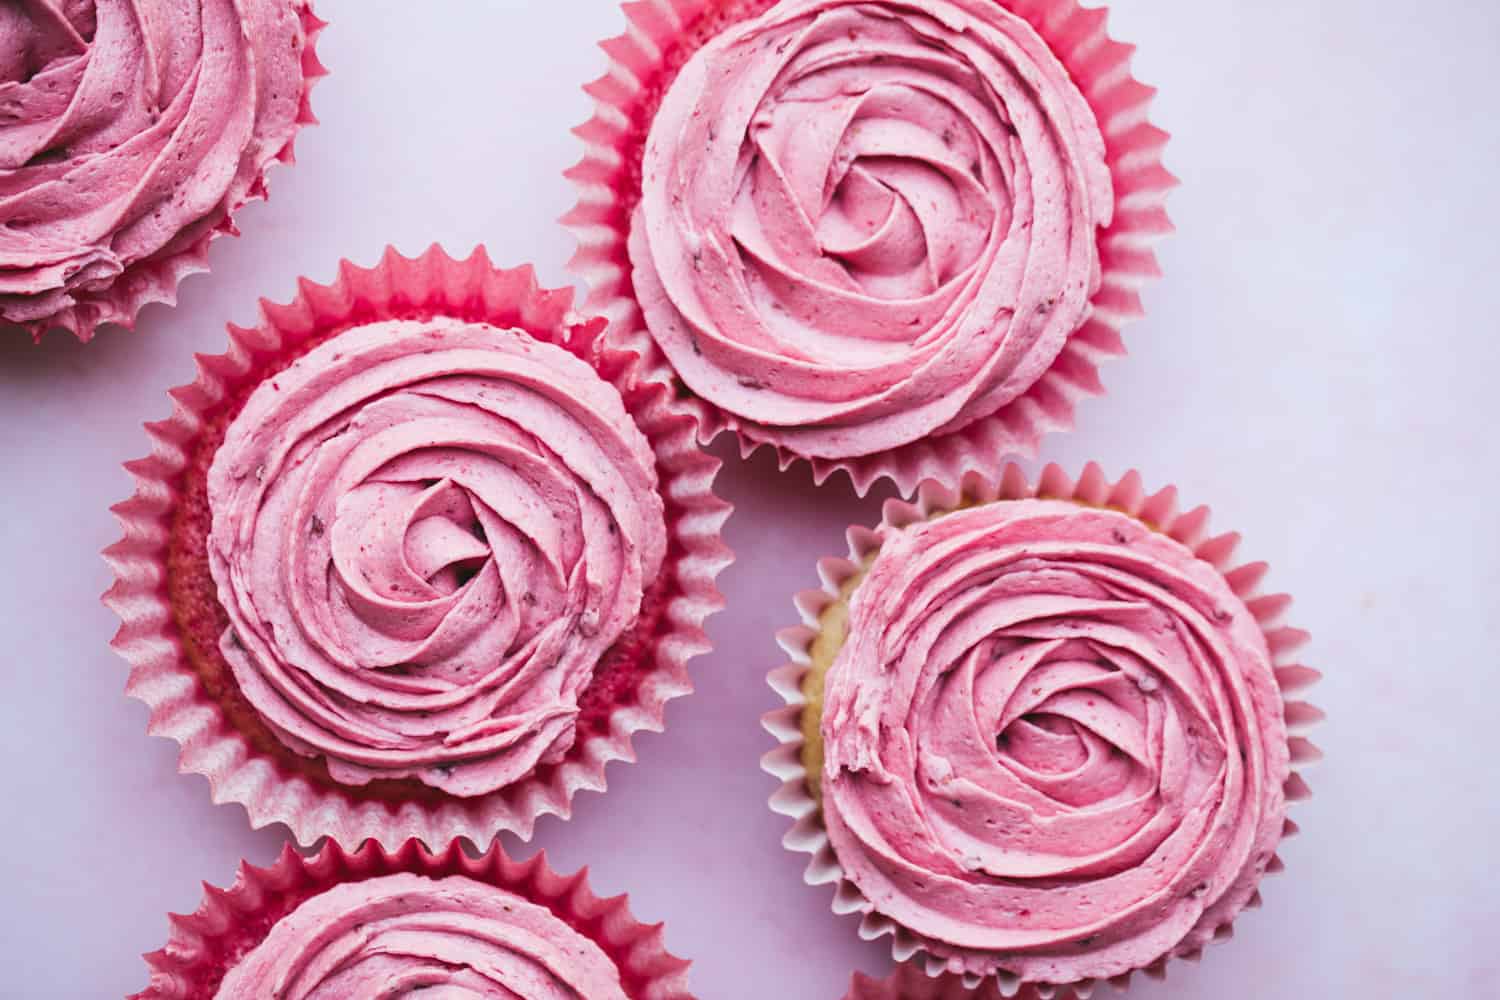 Cupcakes with pink buttercream roses piped on top